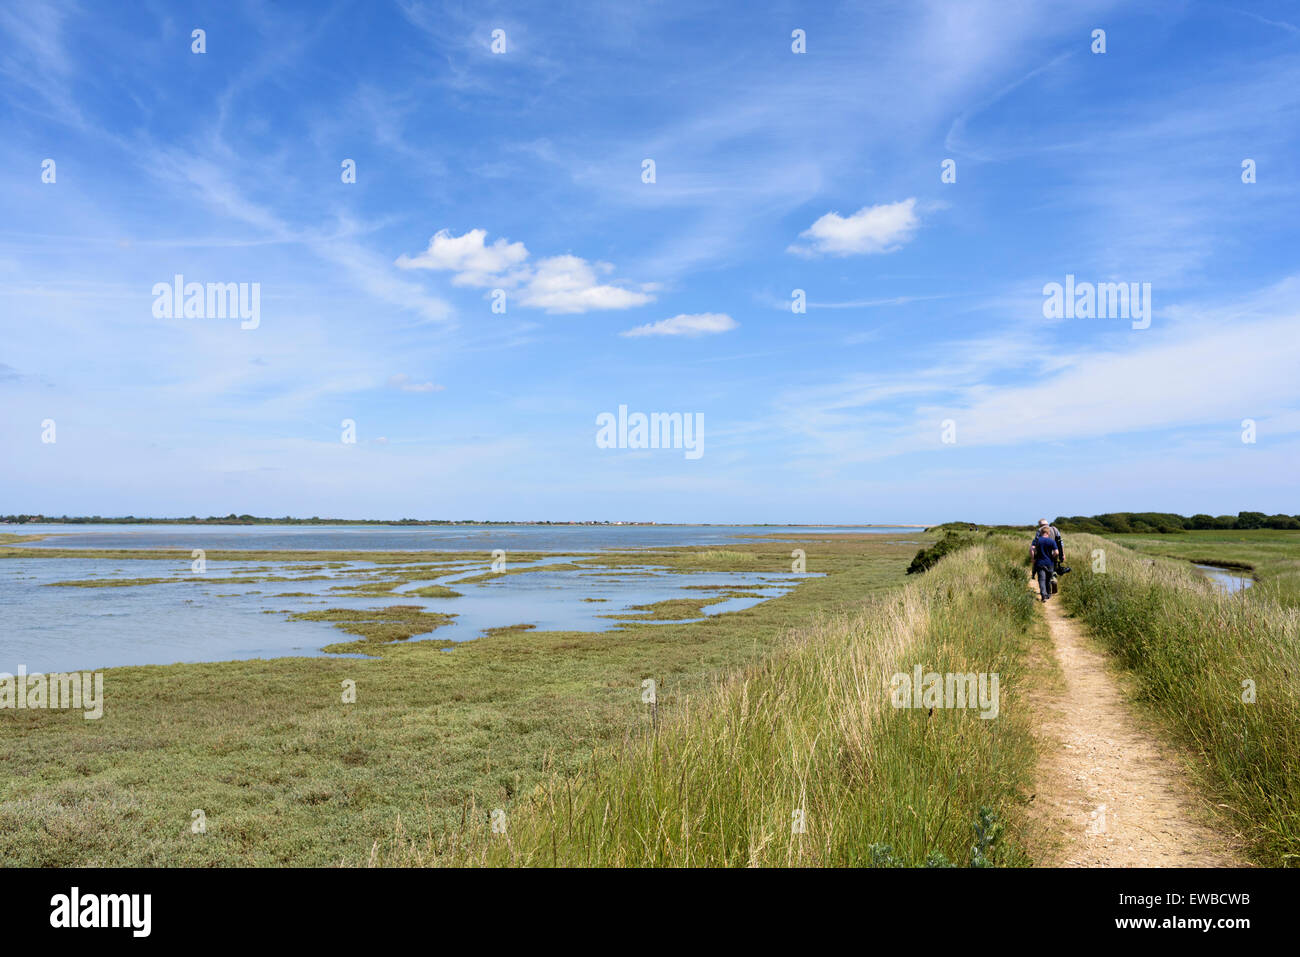 Pagham Harbour, West Sussex, England, an RSPB nature reserve at high tide attracts birdwatchers and photographers. Stock Photo